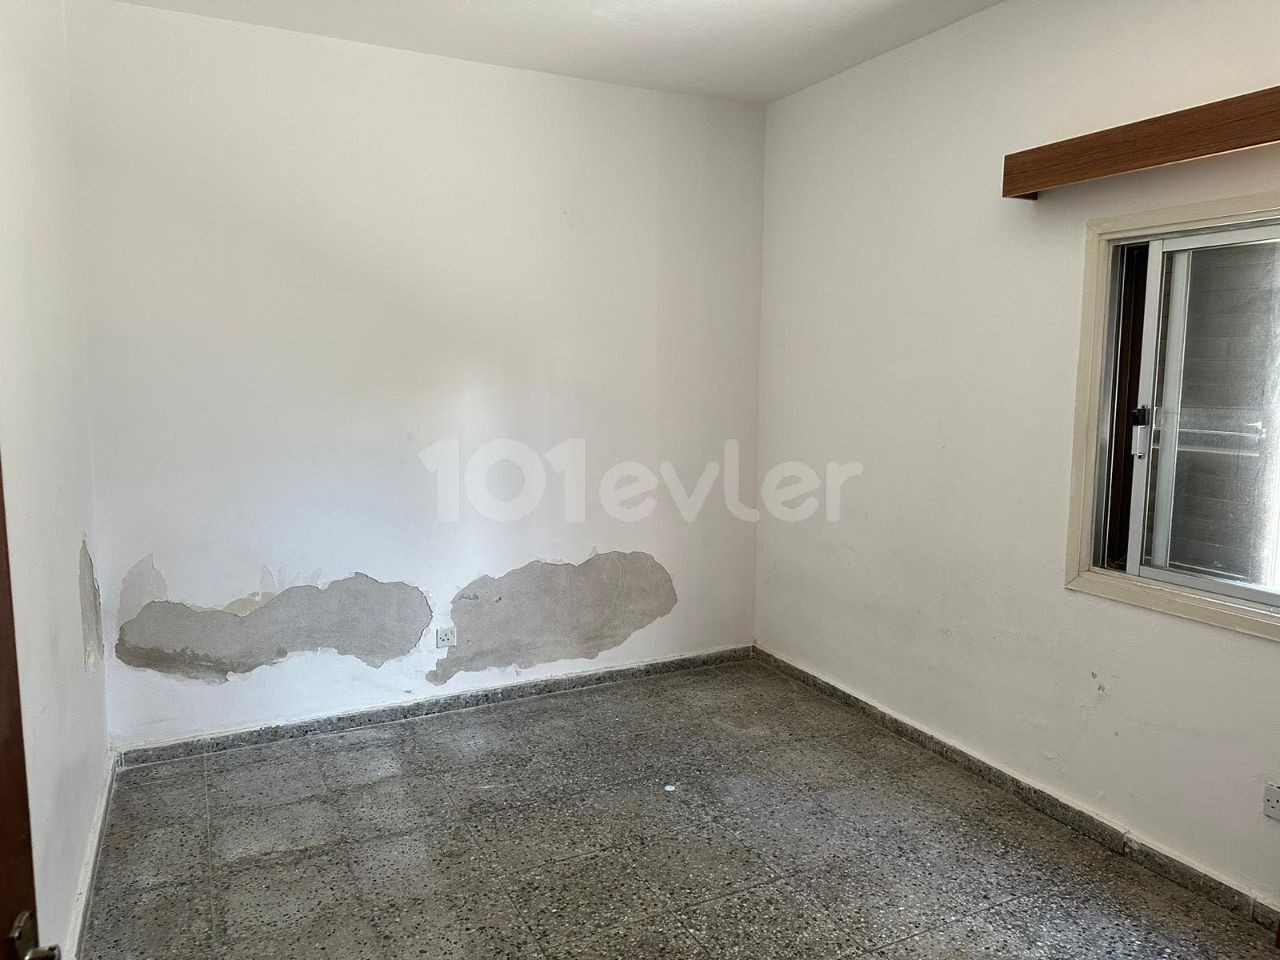 FOR SALE WITH GROUND FLOOR GARDEN AREA. SMALL KAYMAKLI 3+1 SPACIOUS FLAT